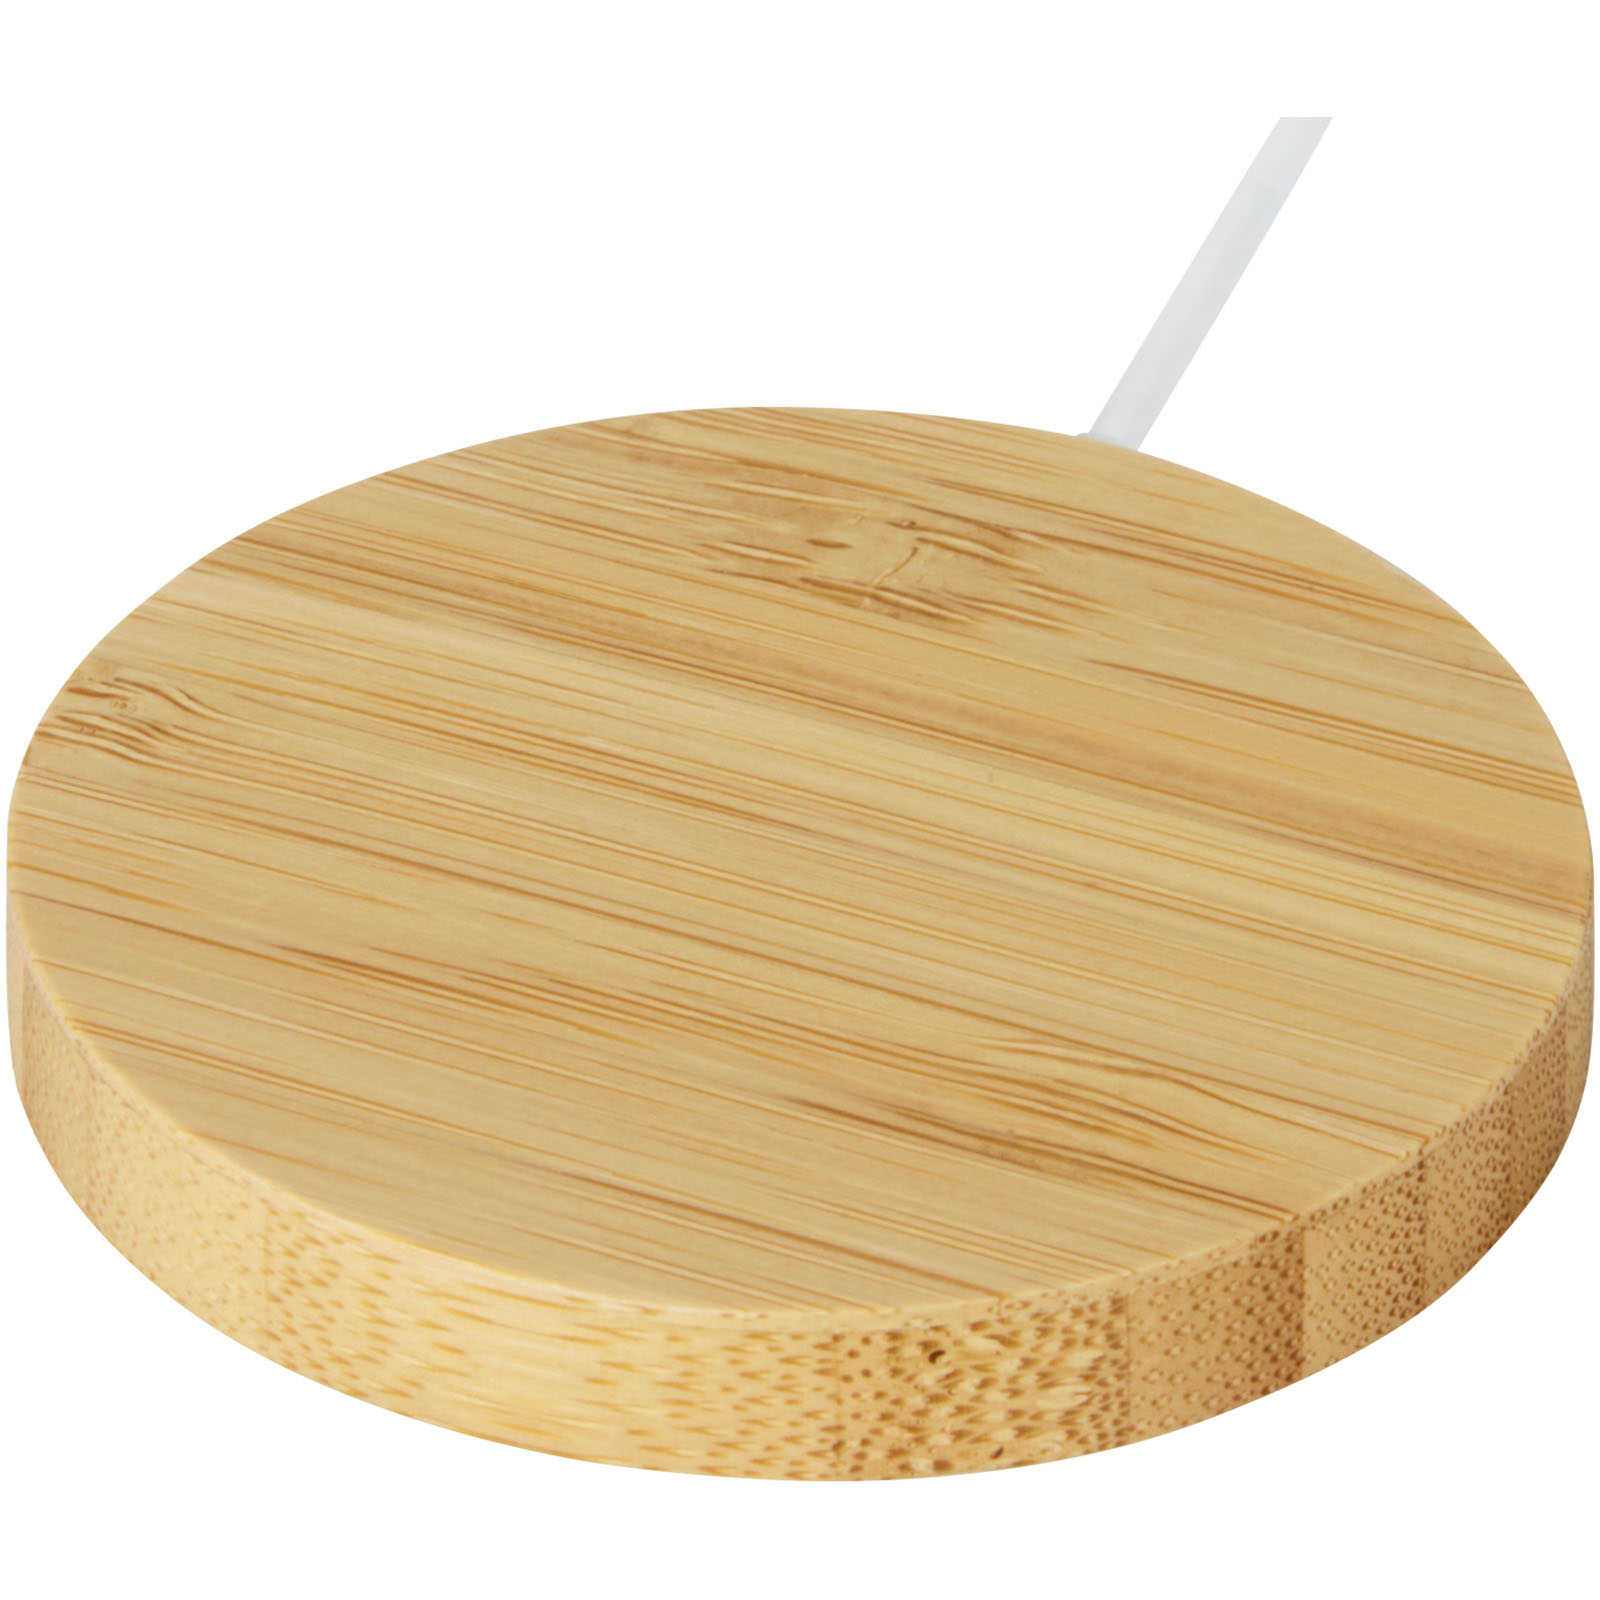 Bamboo magnetic wireless charger GRAUTTE, 10 W - beige